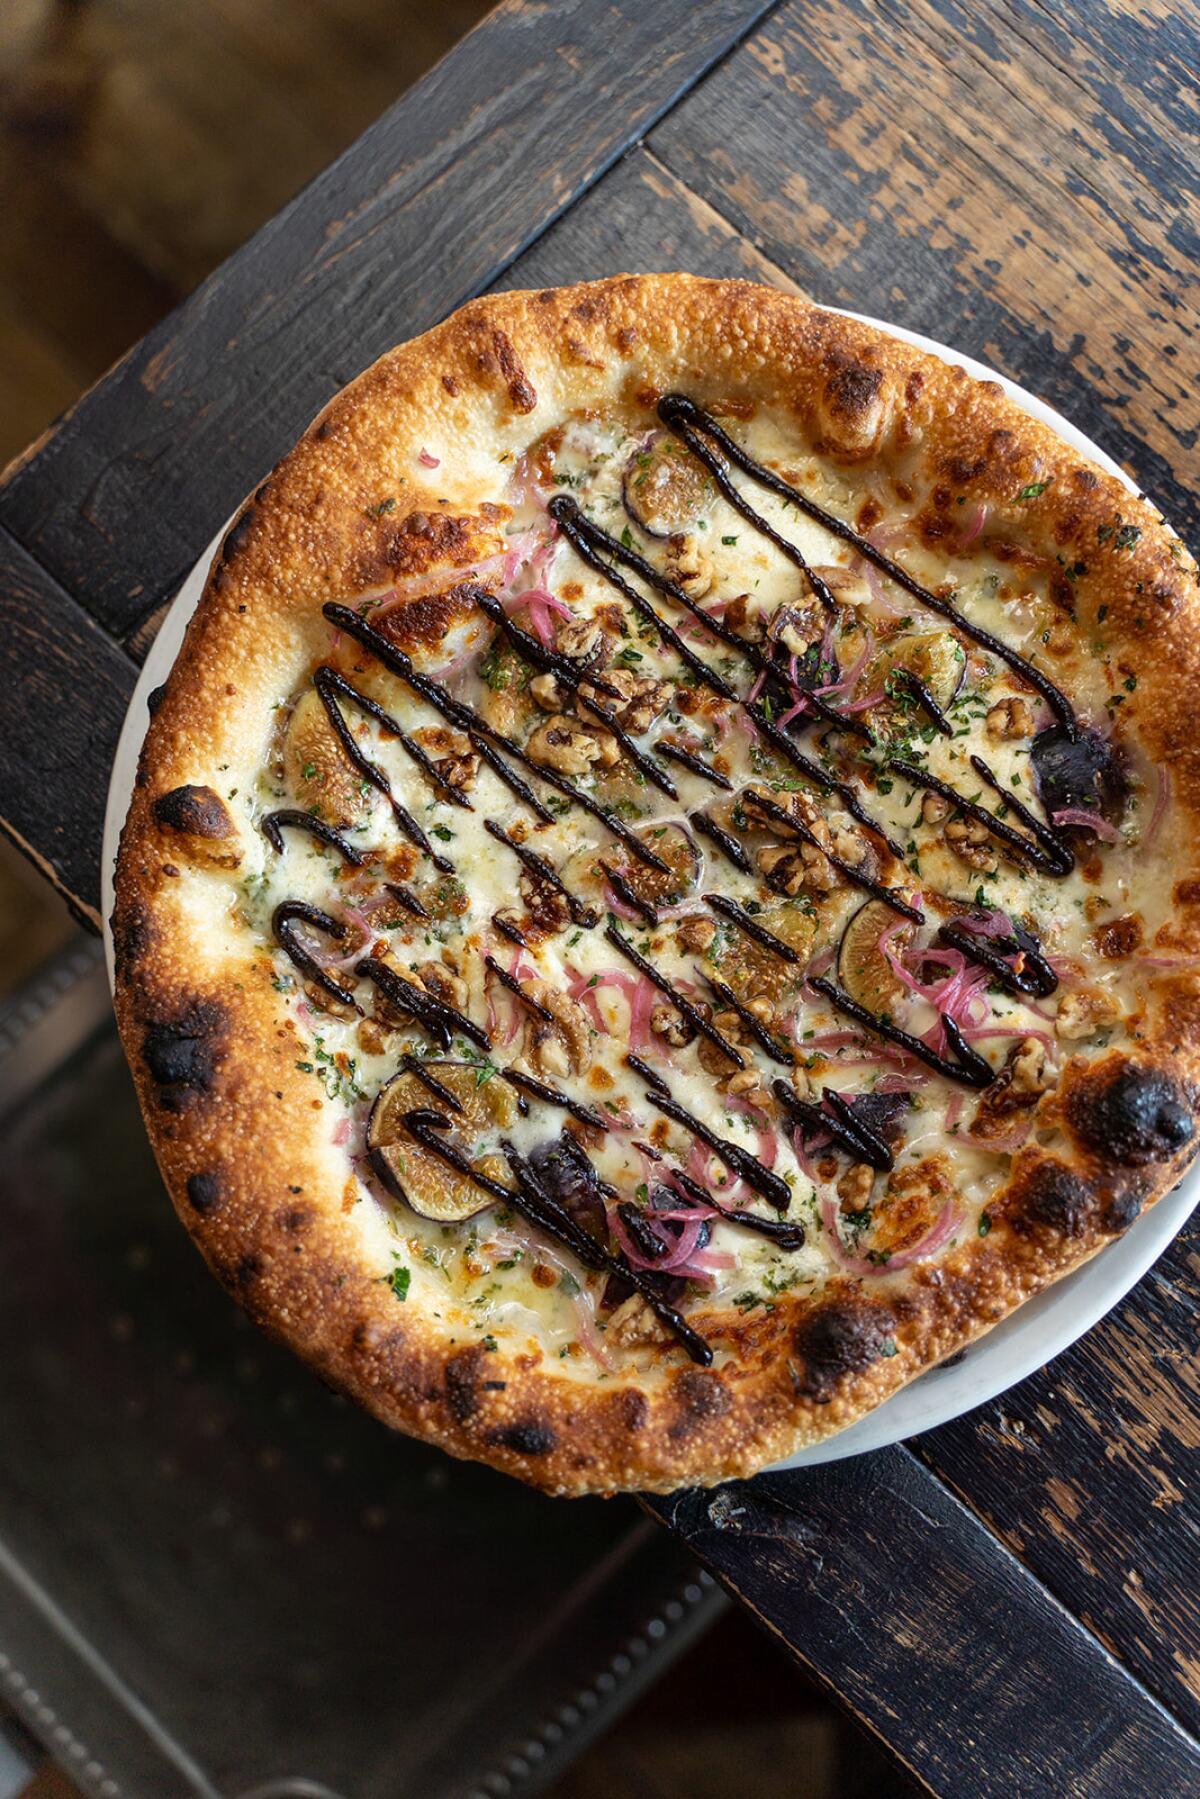 Mission fig pizza, a new fall dish at Cardellino restaurant in Mission Hills.